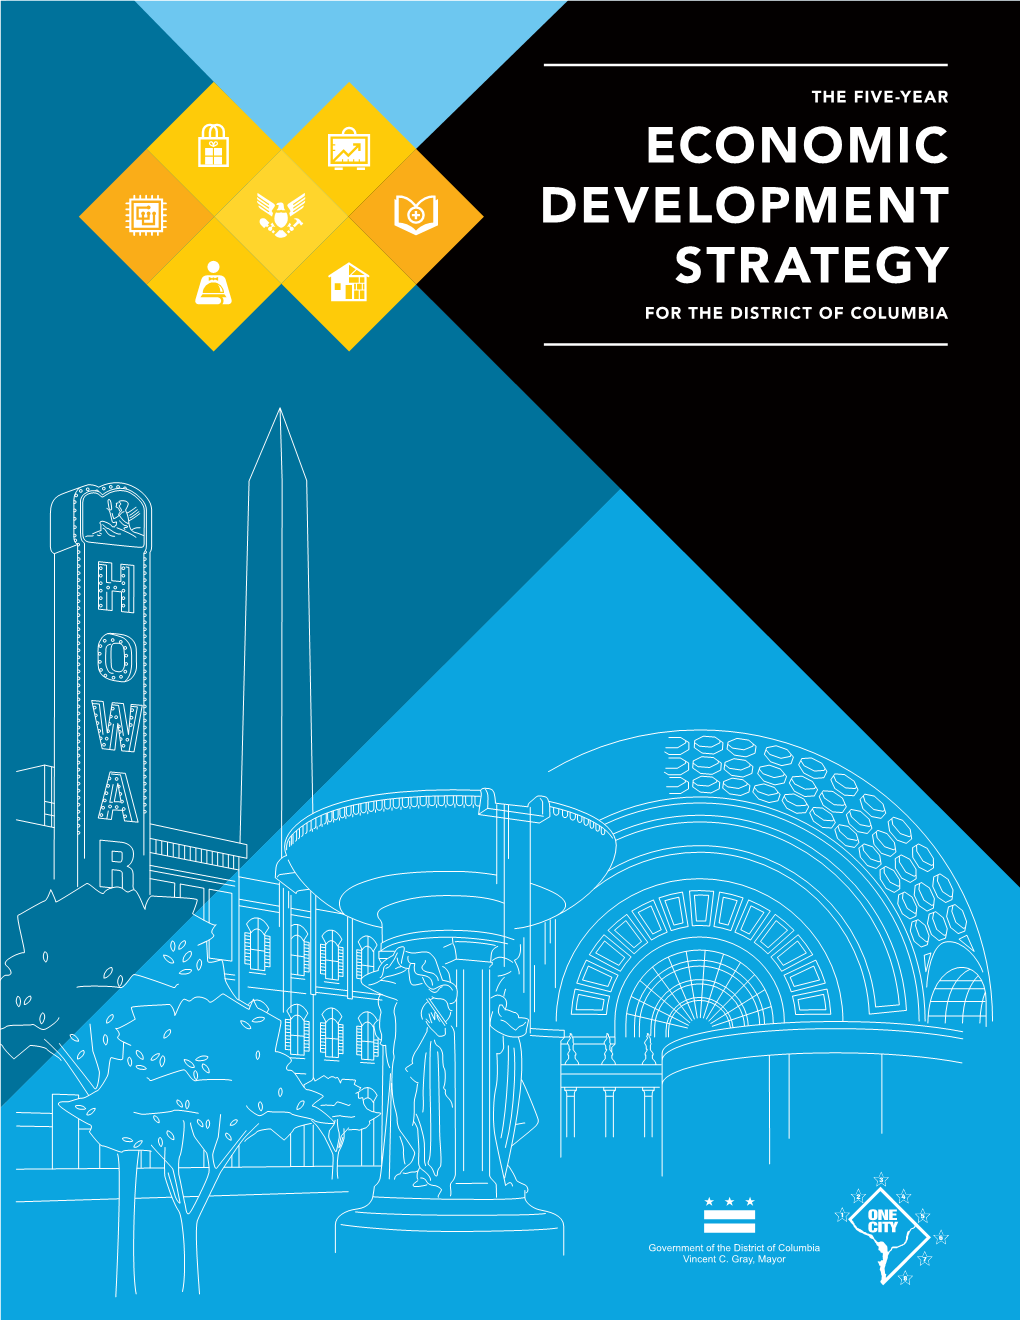 Economic Development Strategy for the District of Columbia